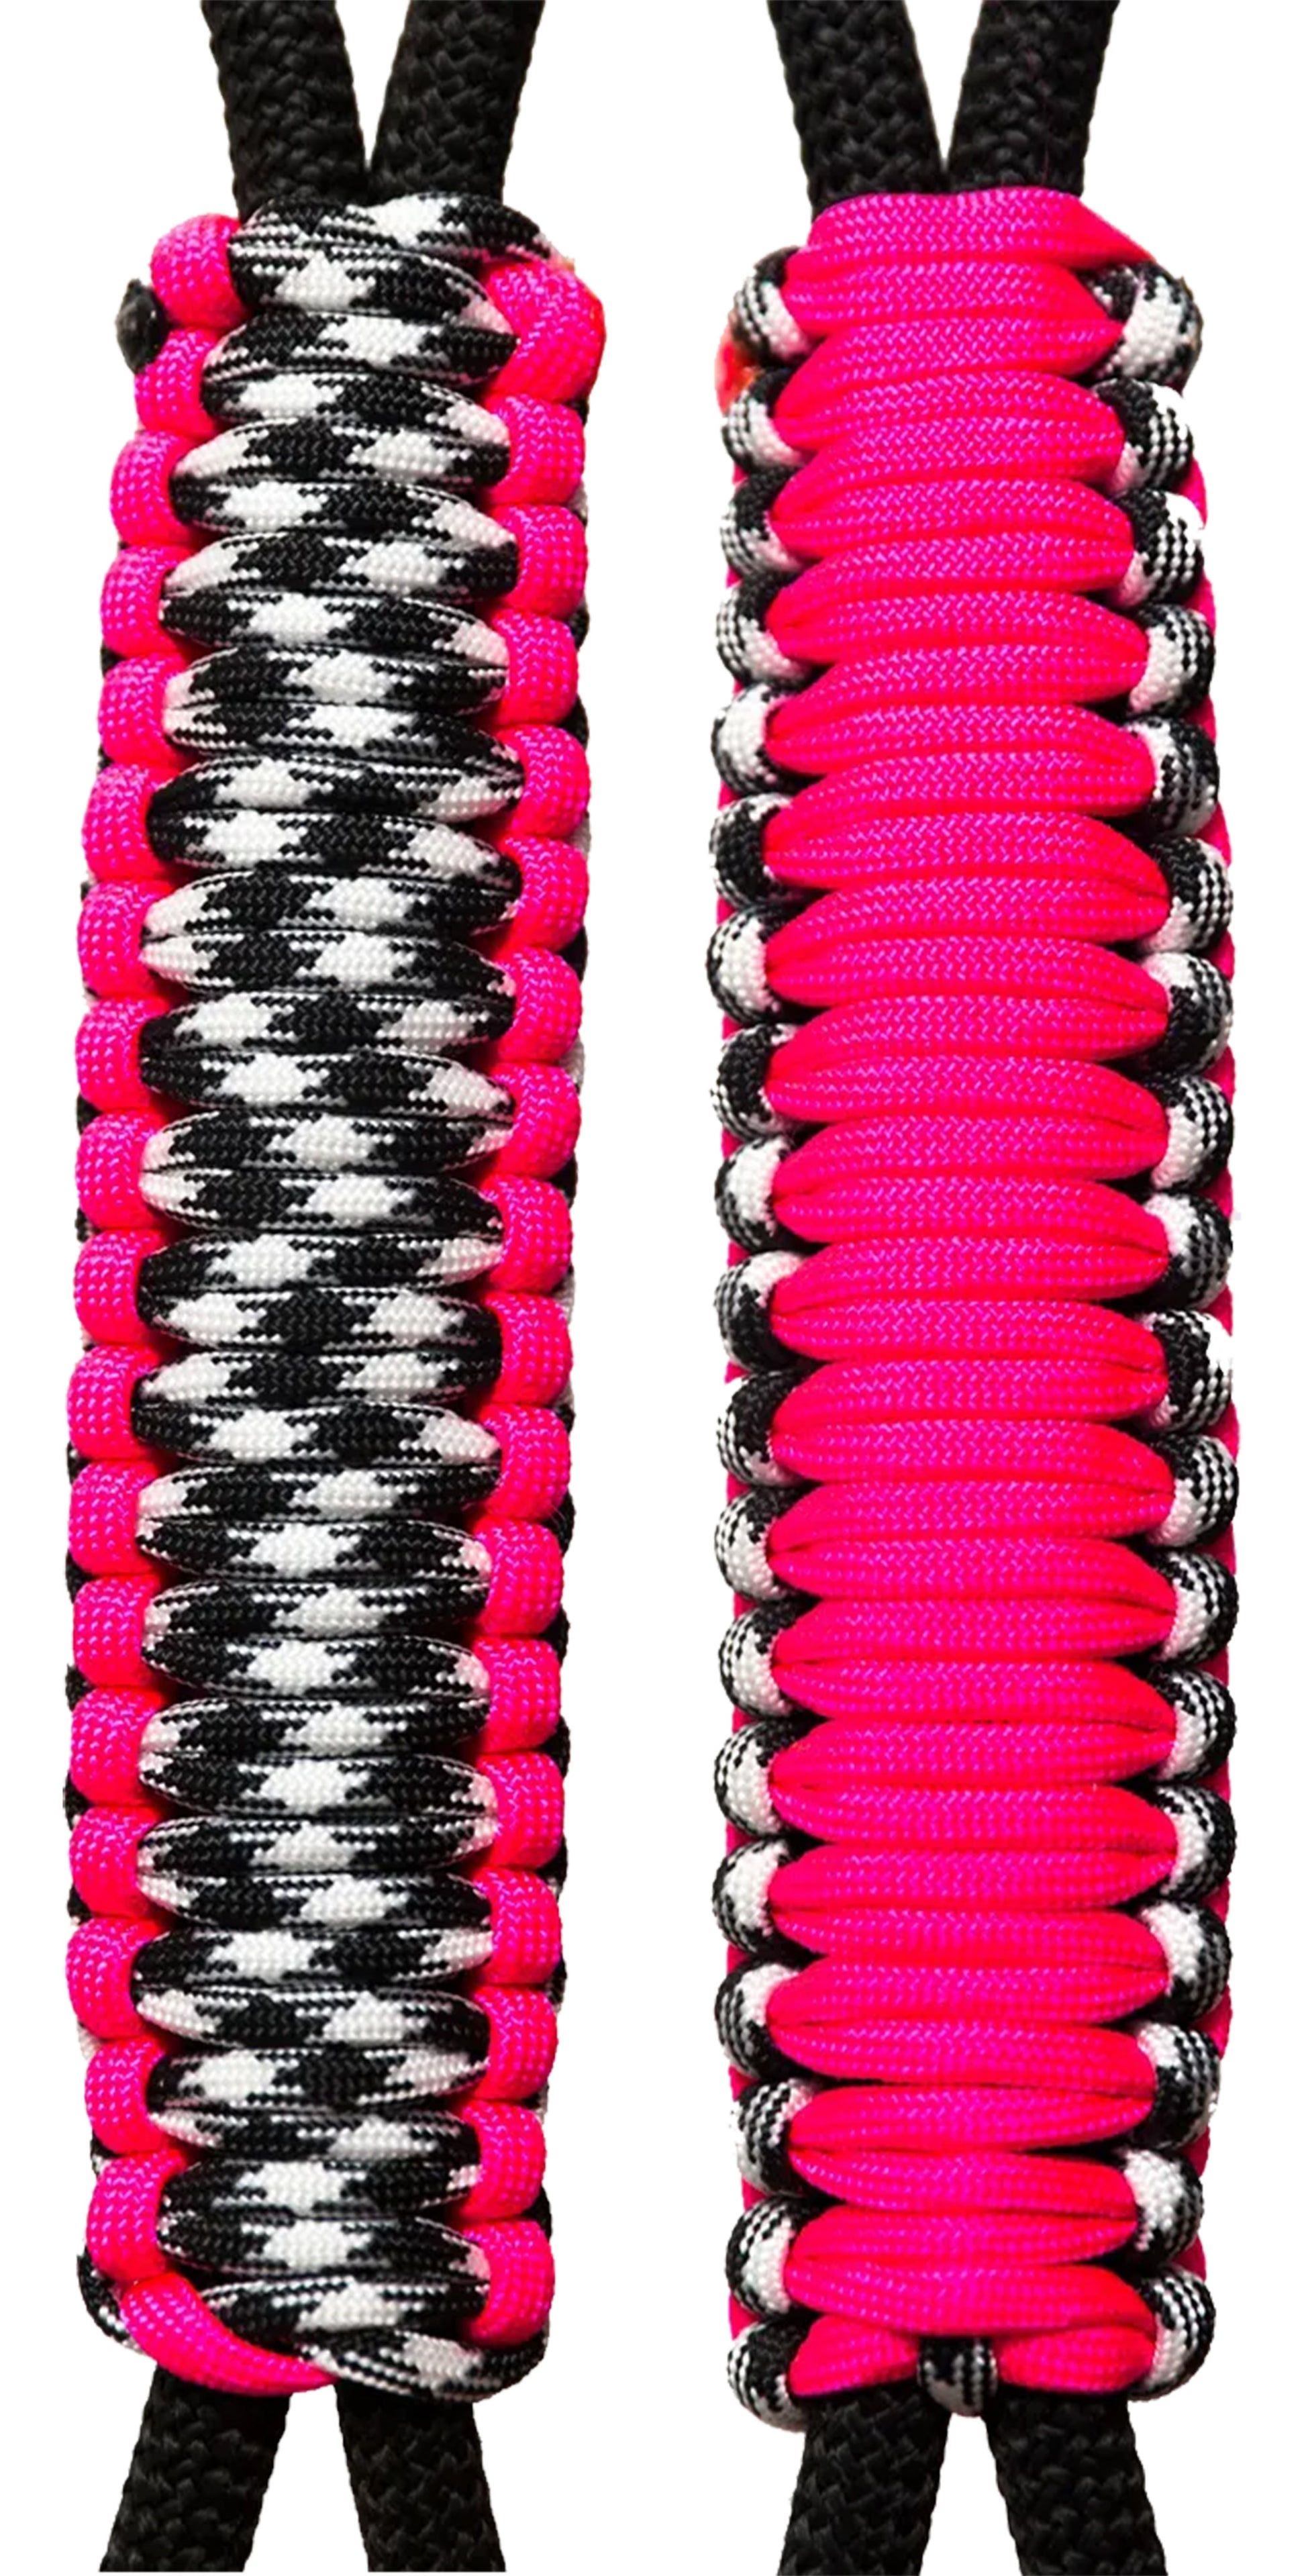 Neon Pink & Houndstooth C008C042 Paracord Handmade Handles for Stainless Steel Tumblers - Made in USA!